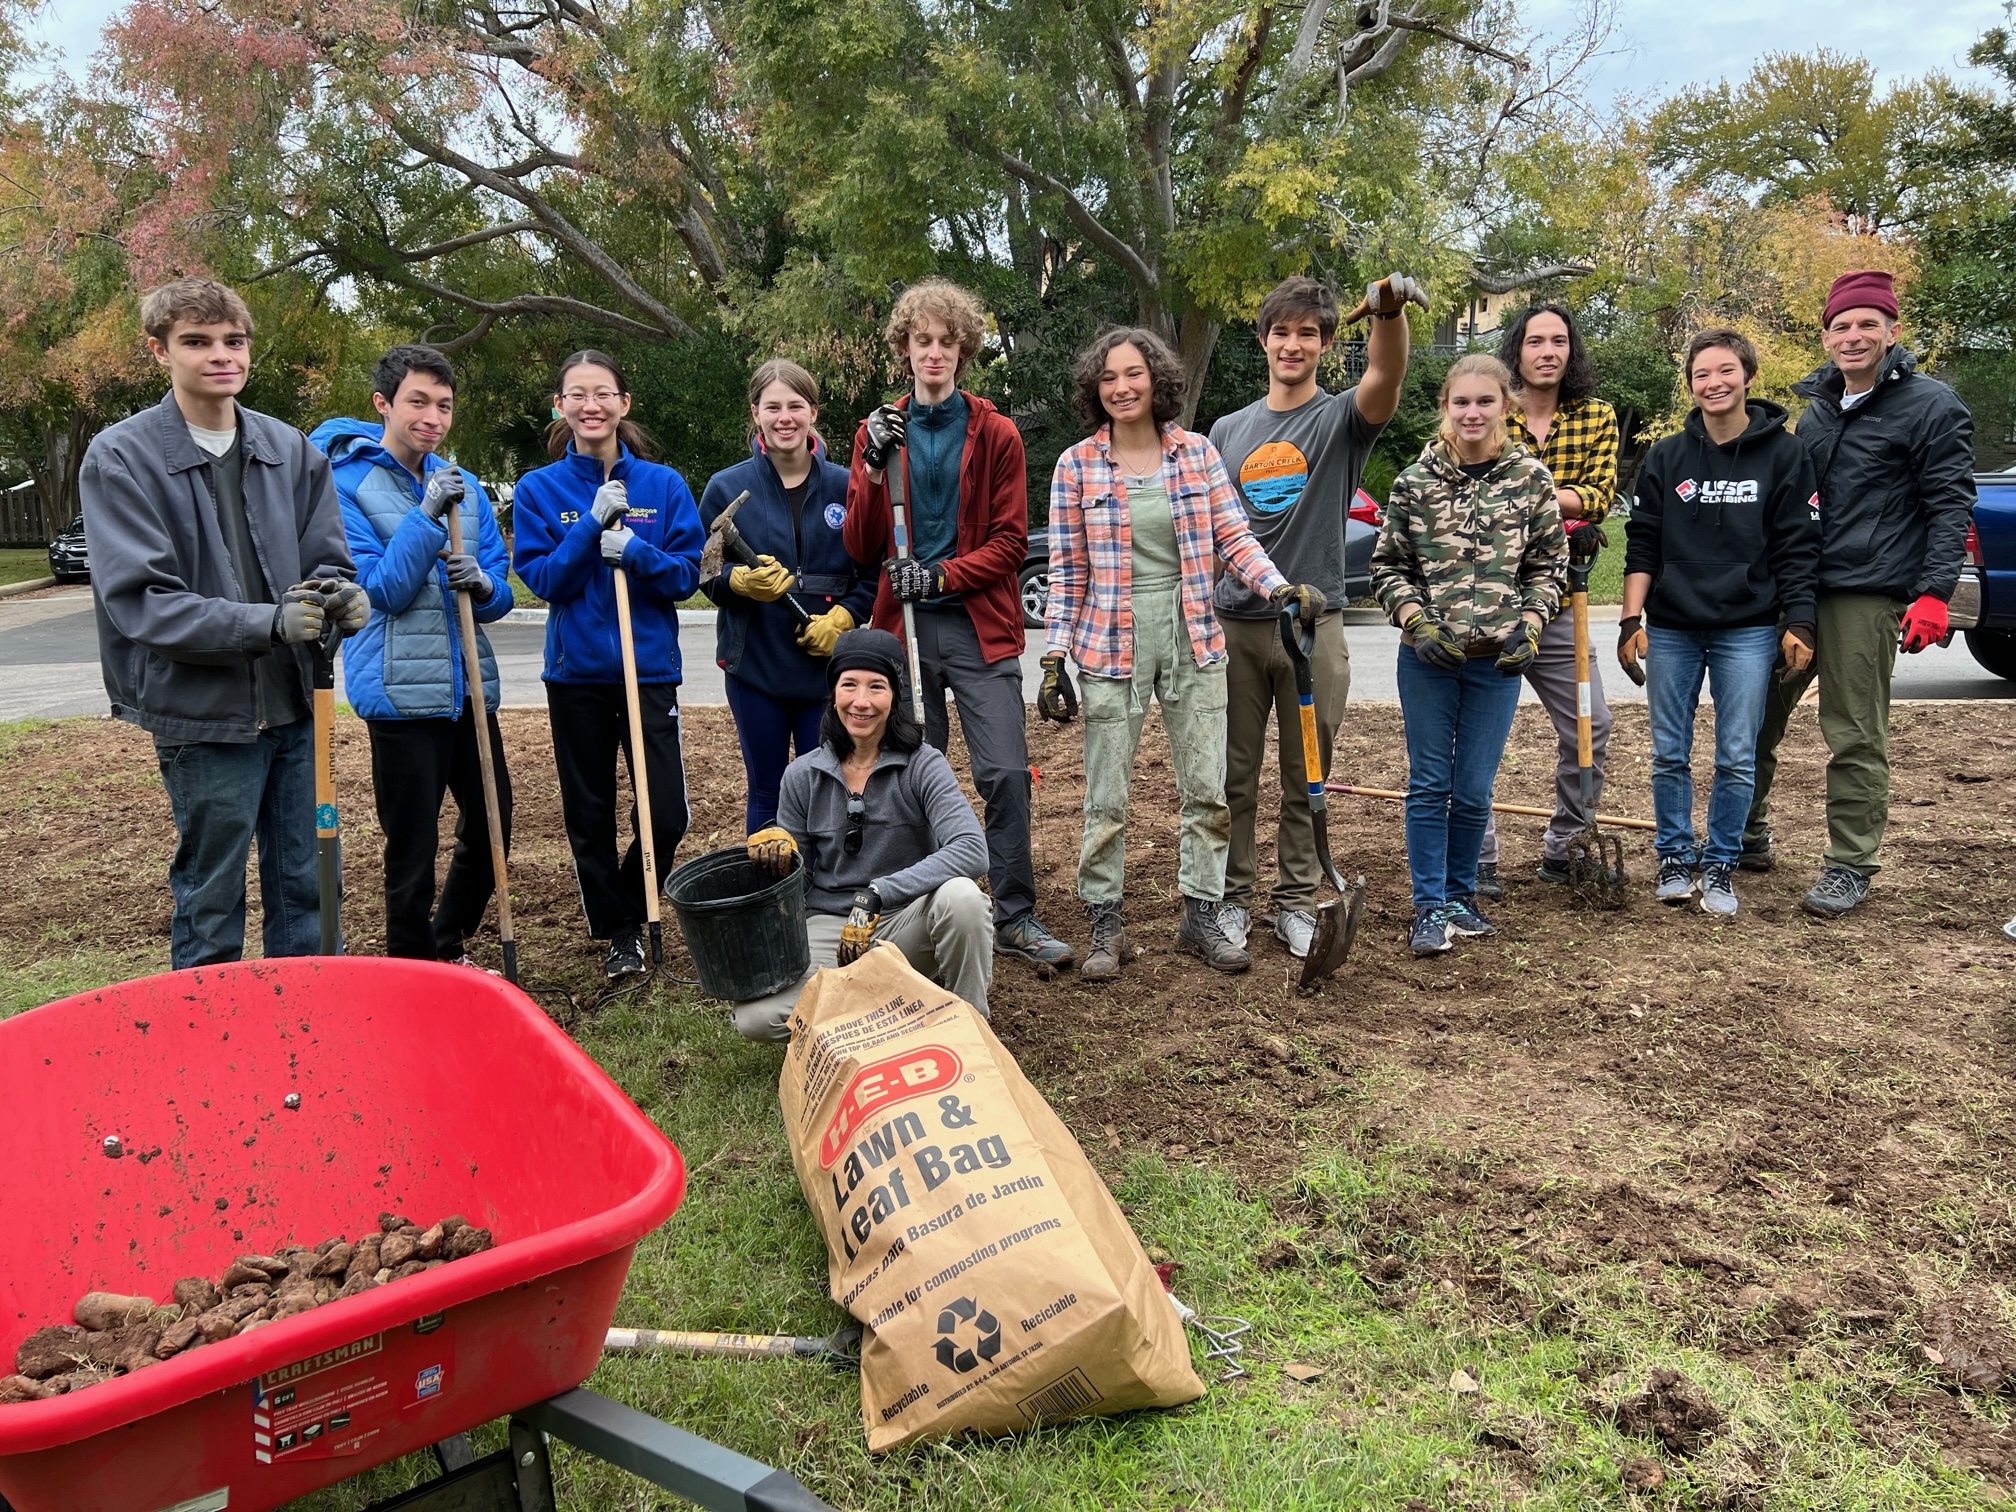 Juliette’s crew, taking a second to pose while planting. Left to right: Flynn Crawford, Patrick Chao, Crystal Ying, Sasha Krigel, Monica Flores (kneeling), James Hodges, Juliette Madere, Alfred Madere, Lucy Collier, Michael Detjen, Maya Madere and Steve Madere. Photo by Karen Kocher